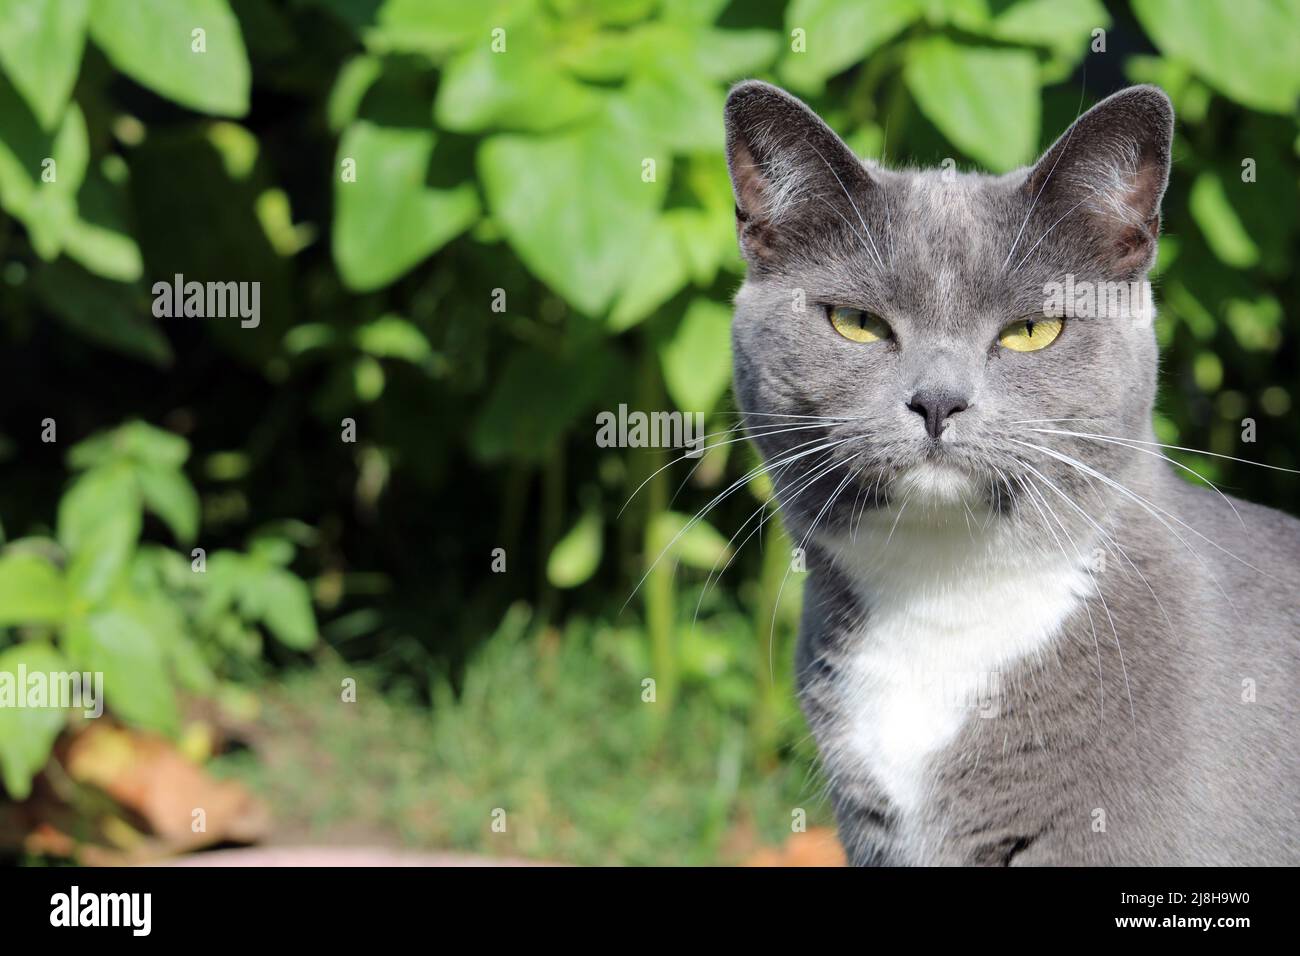 Gray and White Cat outdoors in full bright sun looking directly at you with green plants in background. Stock Photo